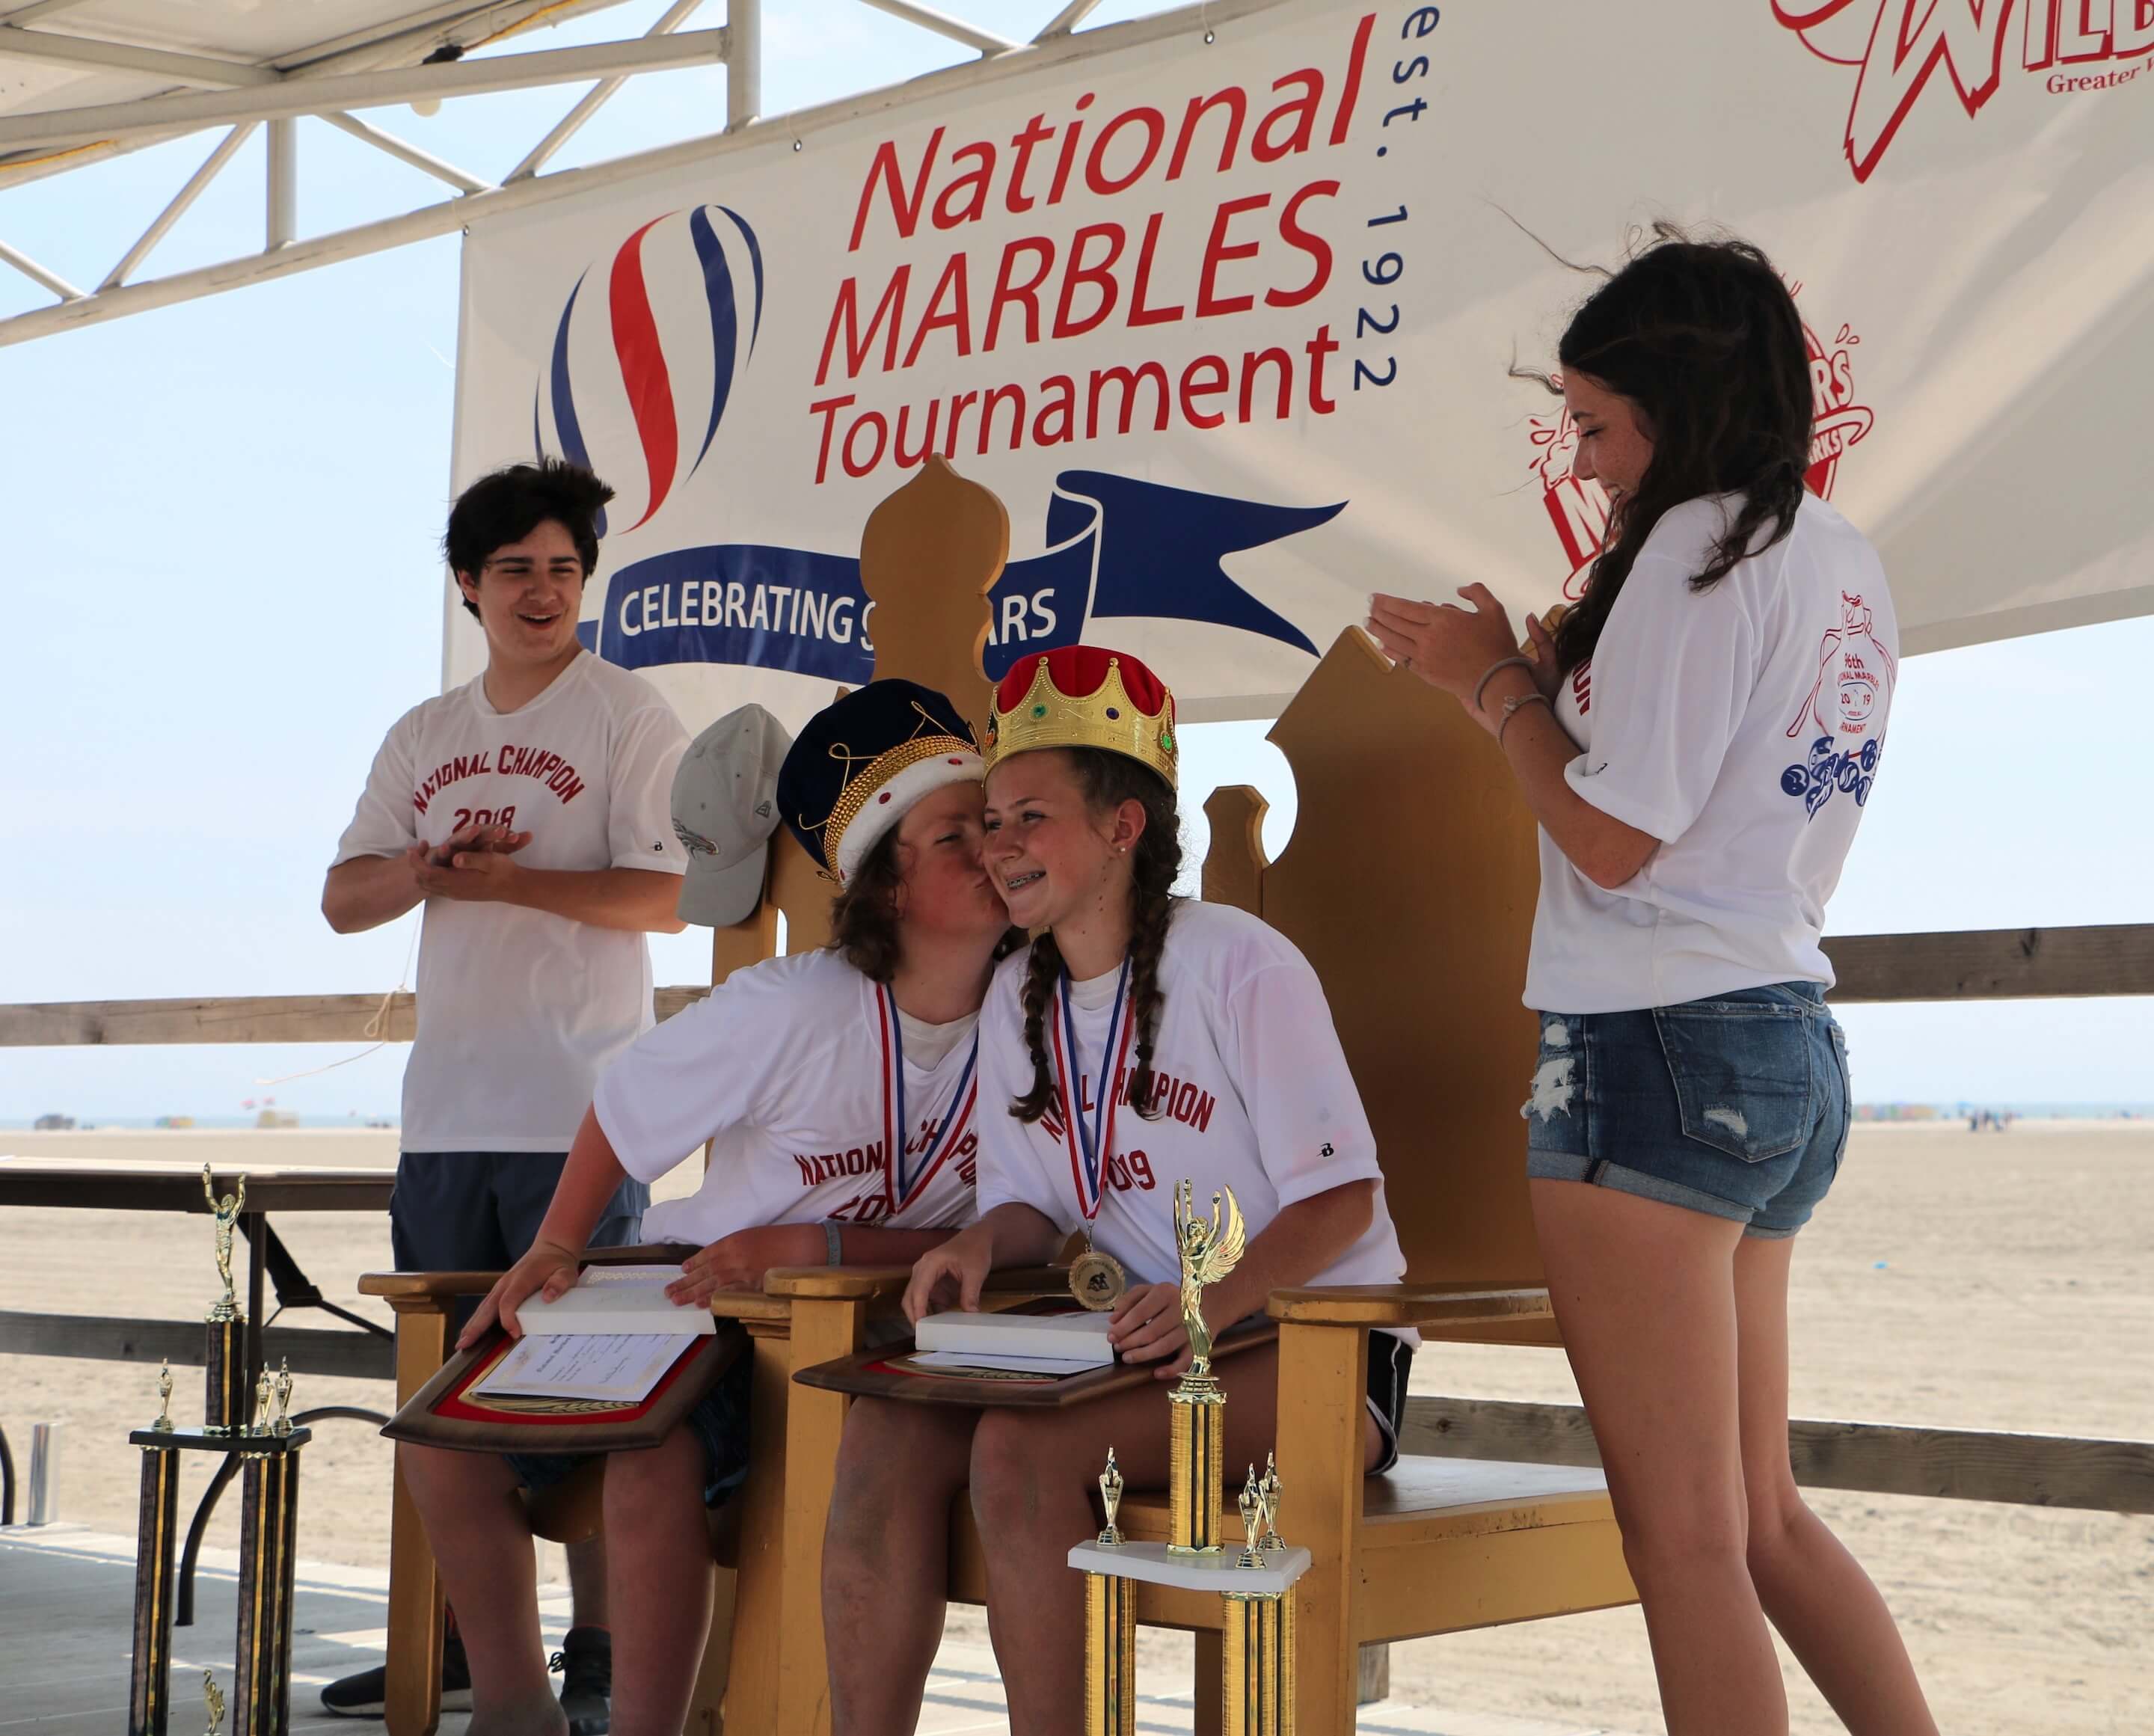 The King and Queen of the 96th Annual National Marbles Tournament were crowned in the Wildwoods June 20. The Boys’ Marbles Champion